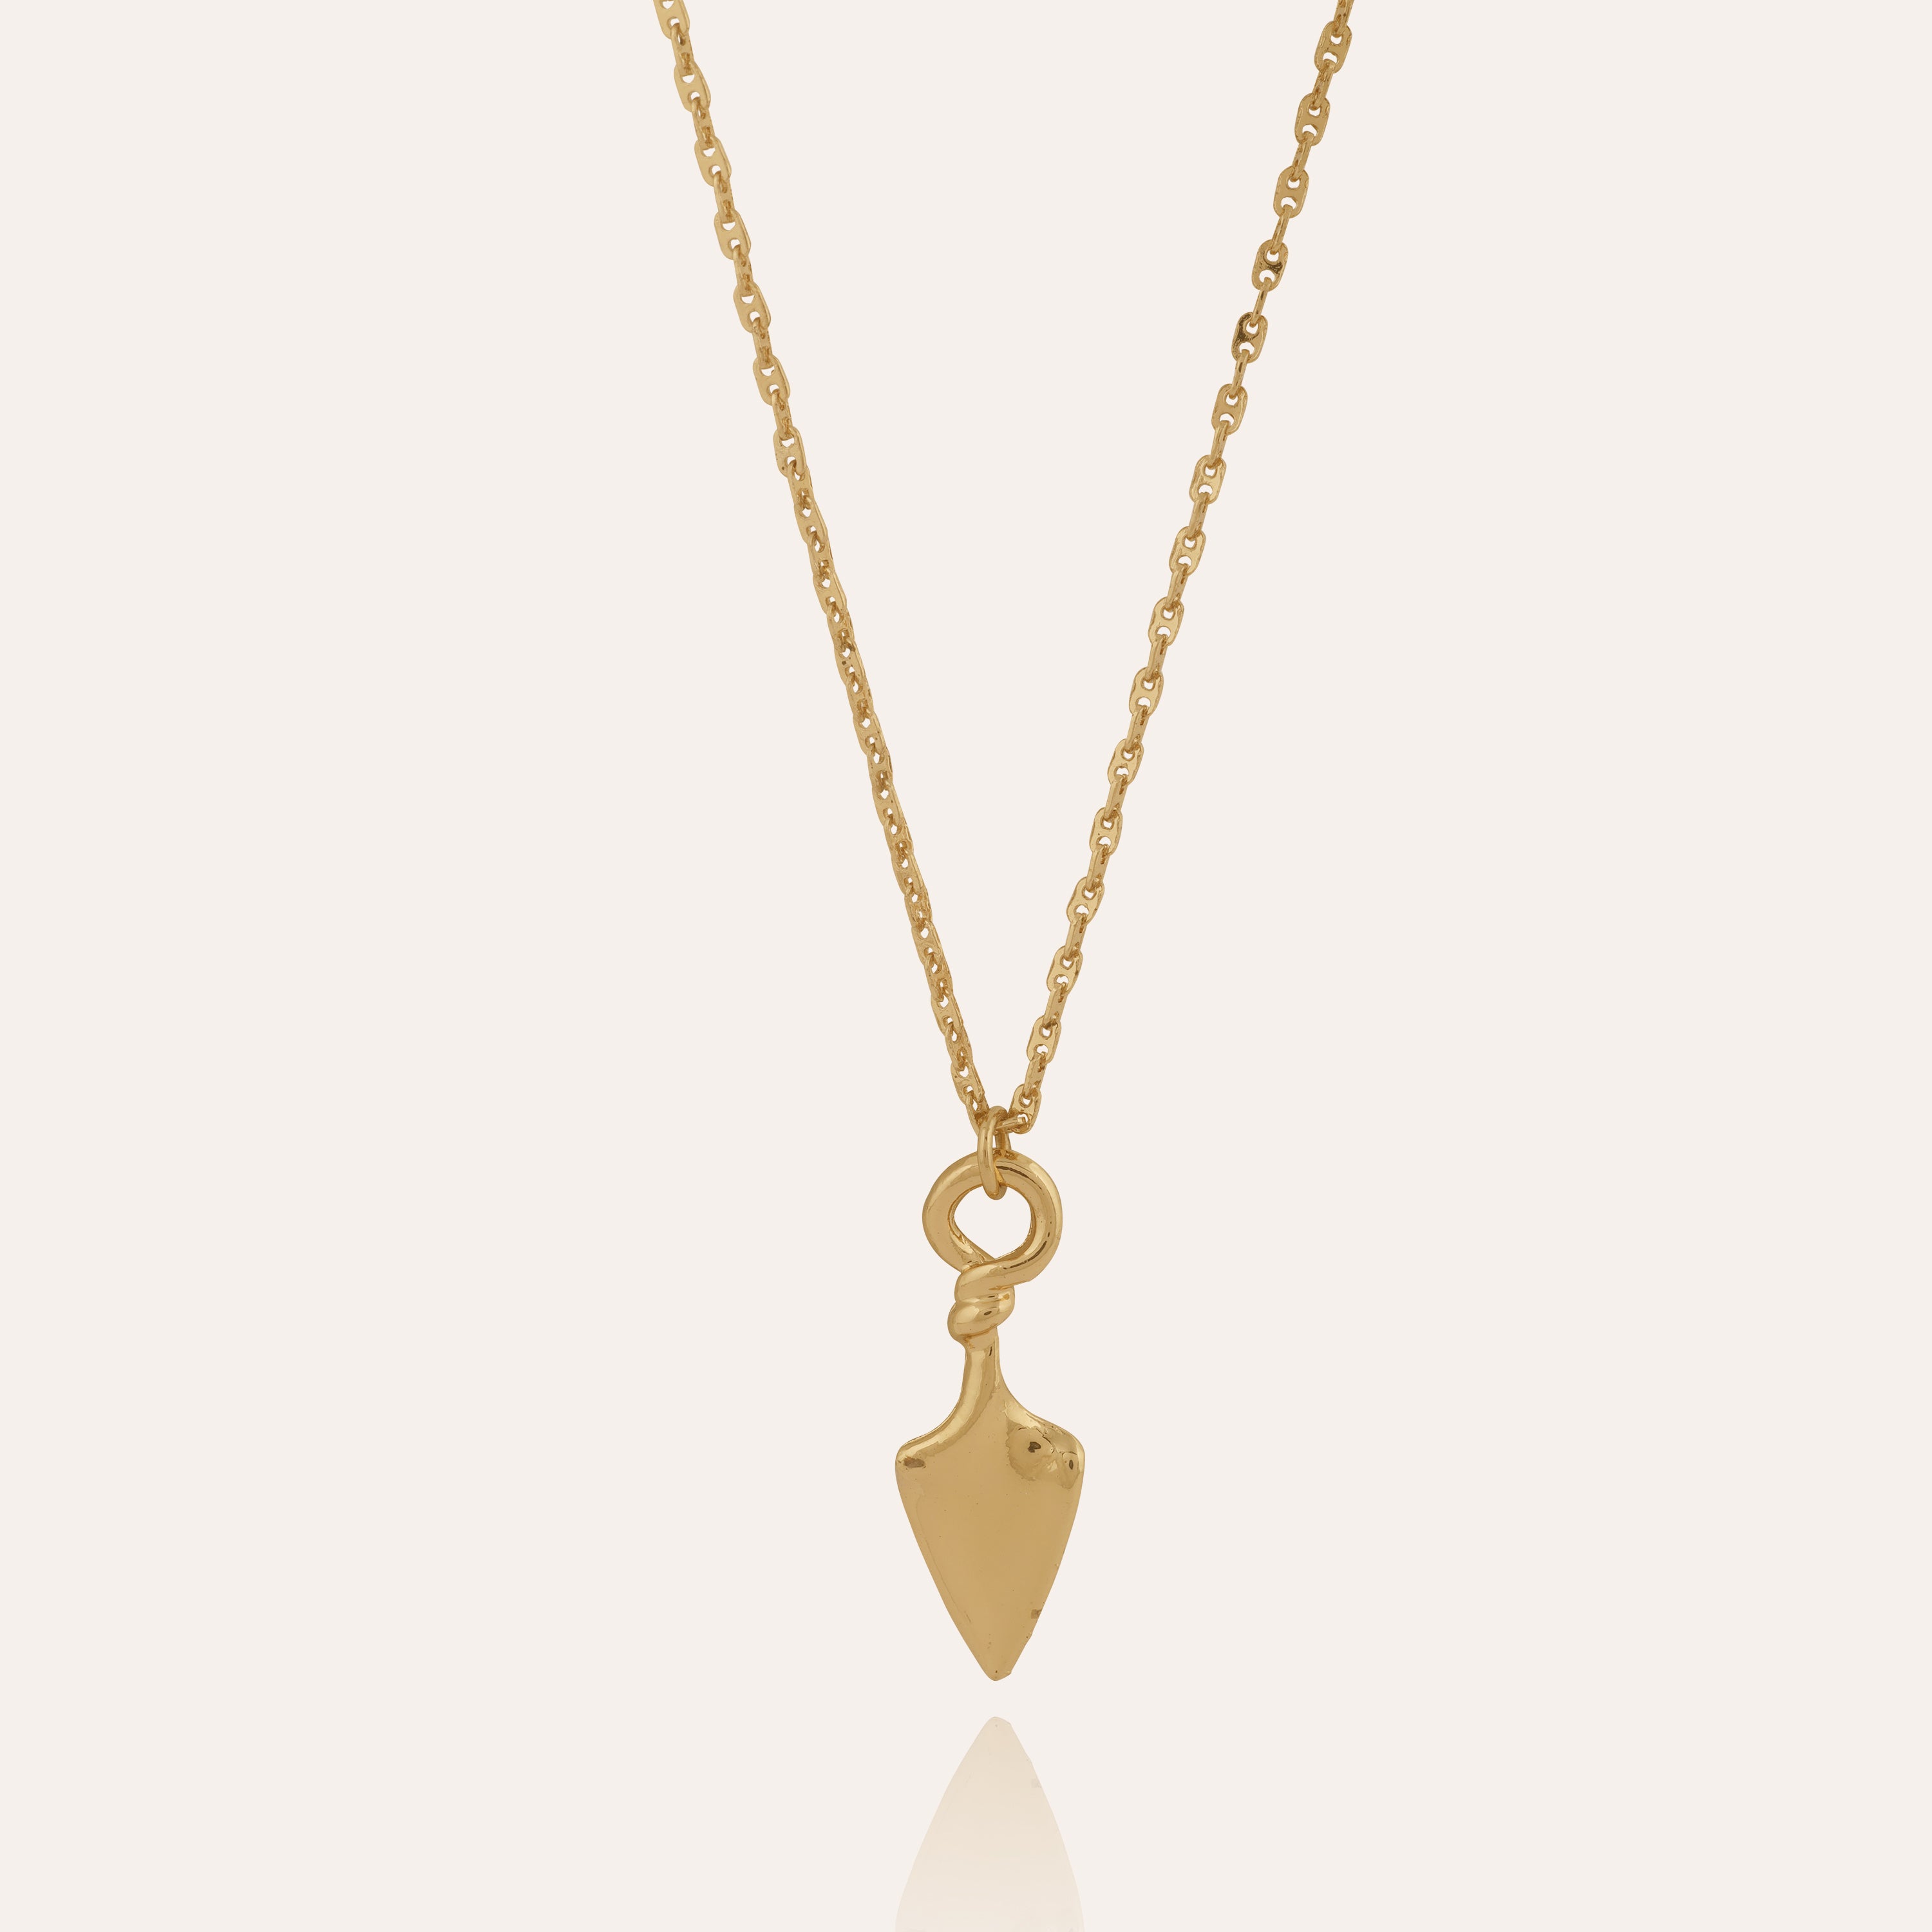 TFC Lovely Heart Plated Pendant Necklace-Enhance your elegance with our collection of gold-plated necklaces for women. Choose from stunning pendant necklaces, chic choker necklaces, and trendy layered necklaces. Our sleek and dainty designs are both affordable and anti-tarnish, ensuring lasting beauty. Enjoy the cheapest fashion jewellery, lightweight and stylish- only at The Fun Company.